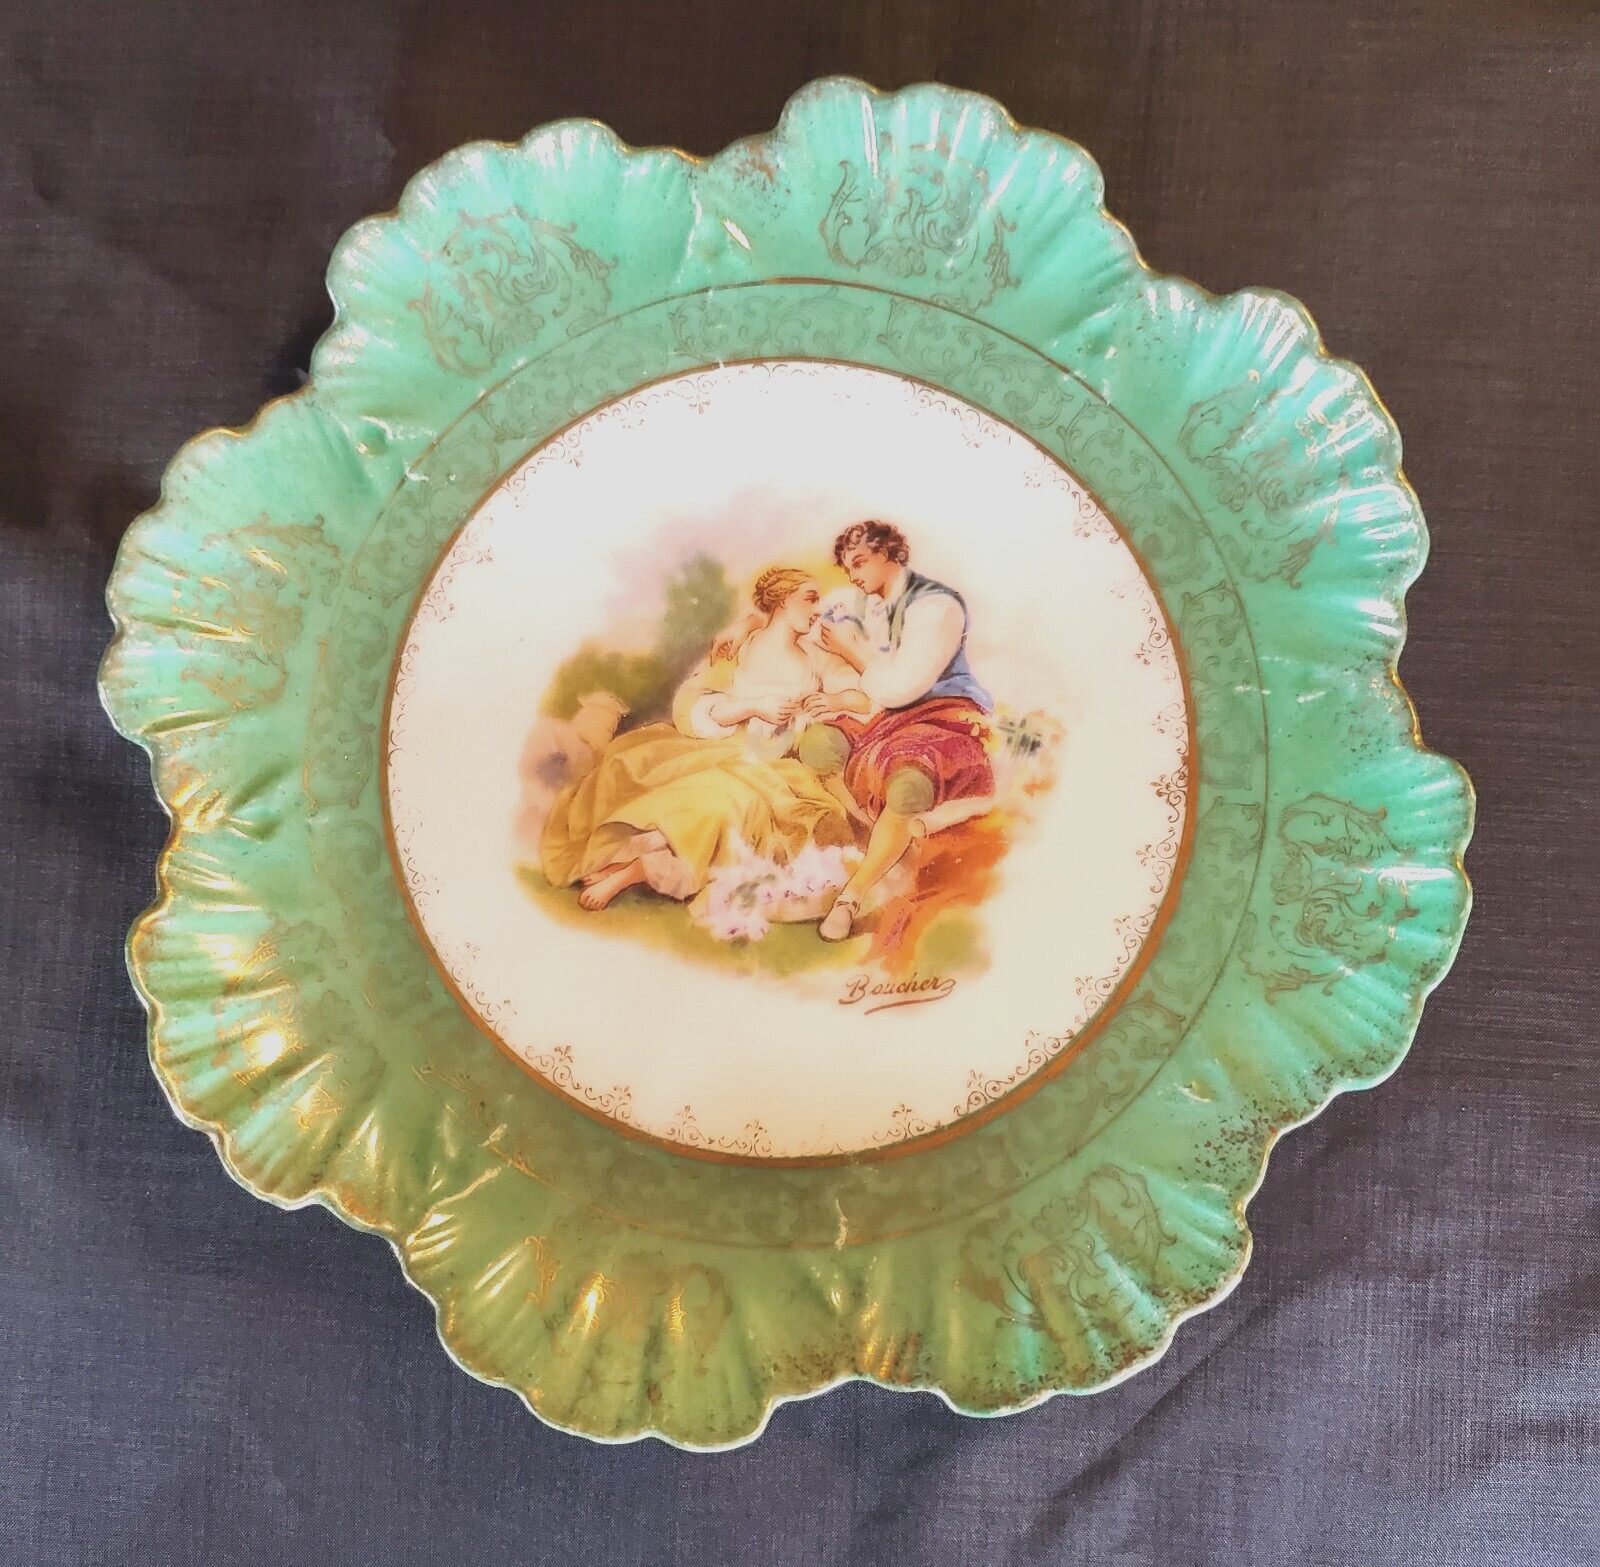 Antique Royal Vienna Scalloped Edged Plate w/ Scene of Romantic Couple Signed